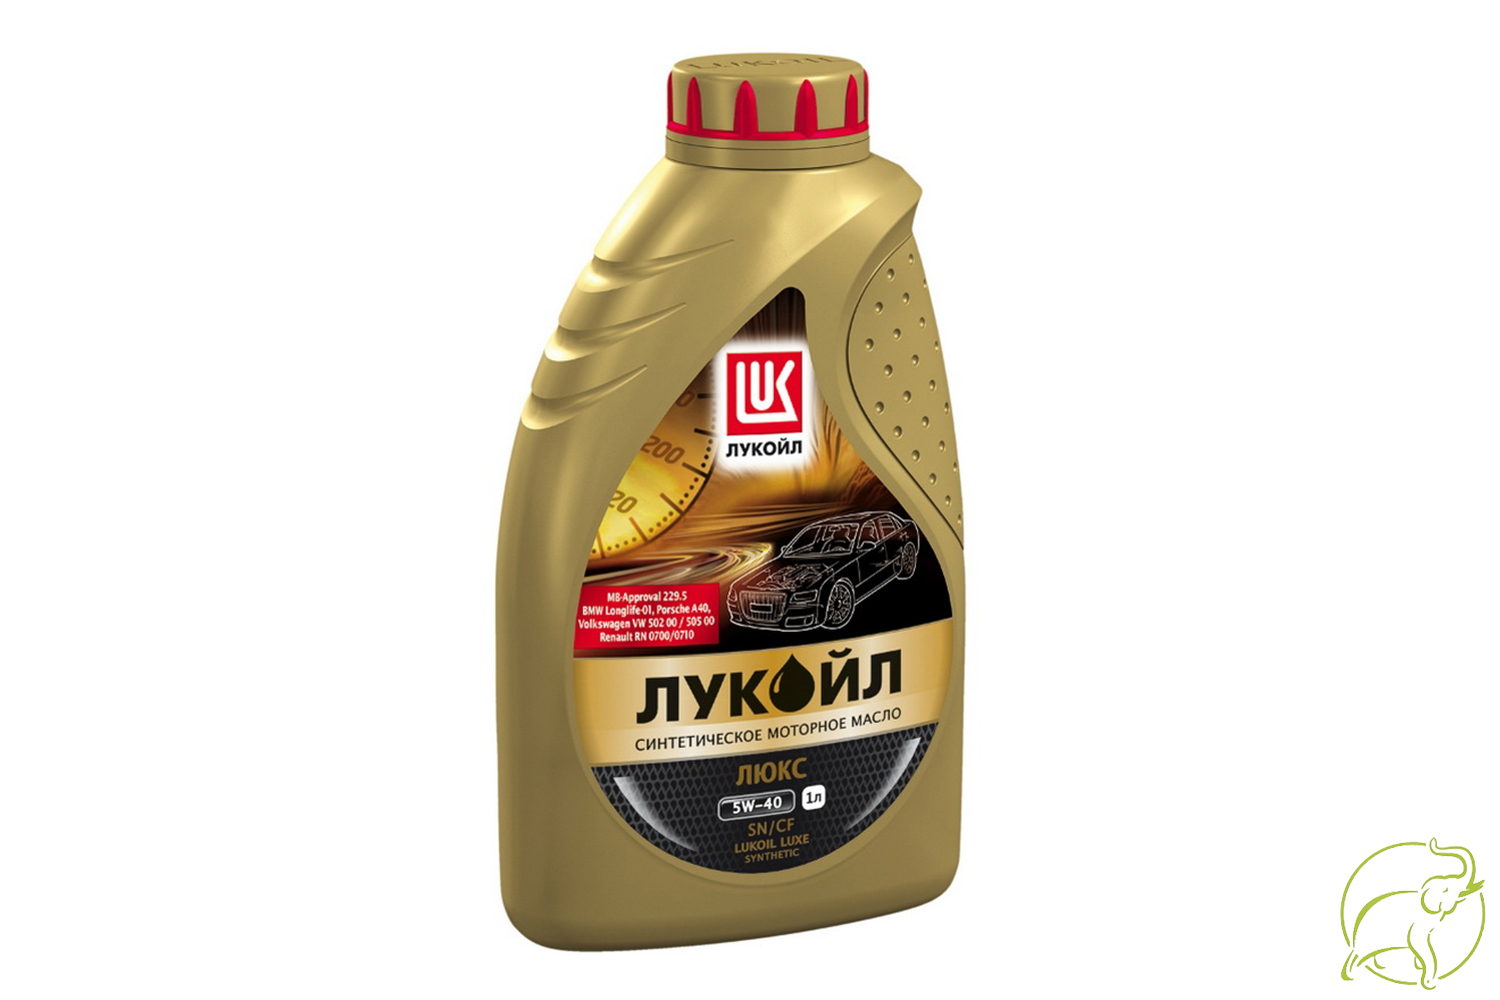 Моторное масло роснефть лукойл. Масло Лукойл Люкс 1л синт 5w40. Lukoil Luxe, Synthetic SAE 5w-40, API SN/CF. Масло моторное Лукойл Люкс синтетическое SAE 5w-40 API SN/CF. Масло Лукойл Люкс моторное синтетич.SAE 5w40 1л.